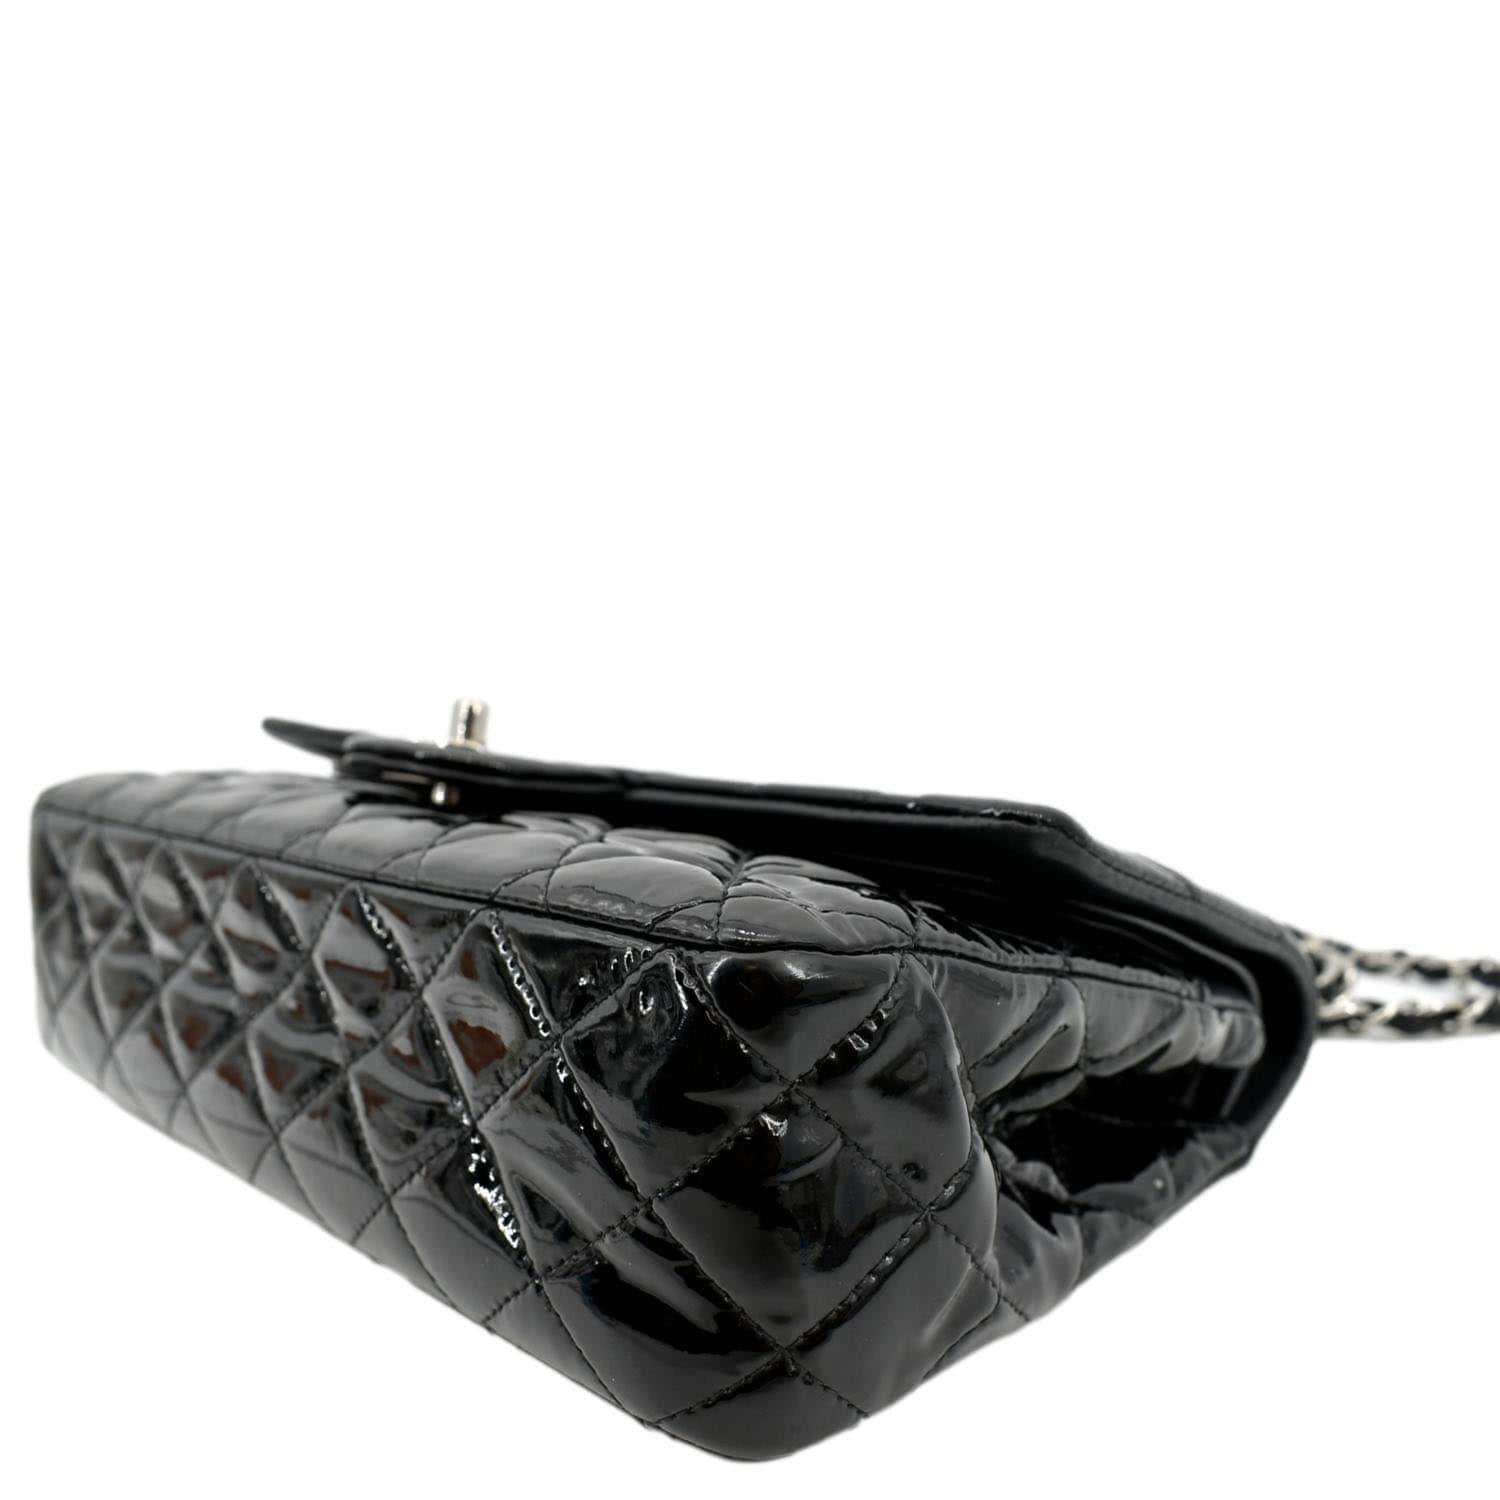 Classic Flap With Medium Crossbody Bag in Patent Leather, Silver Hardw